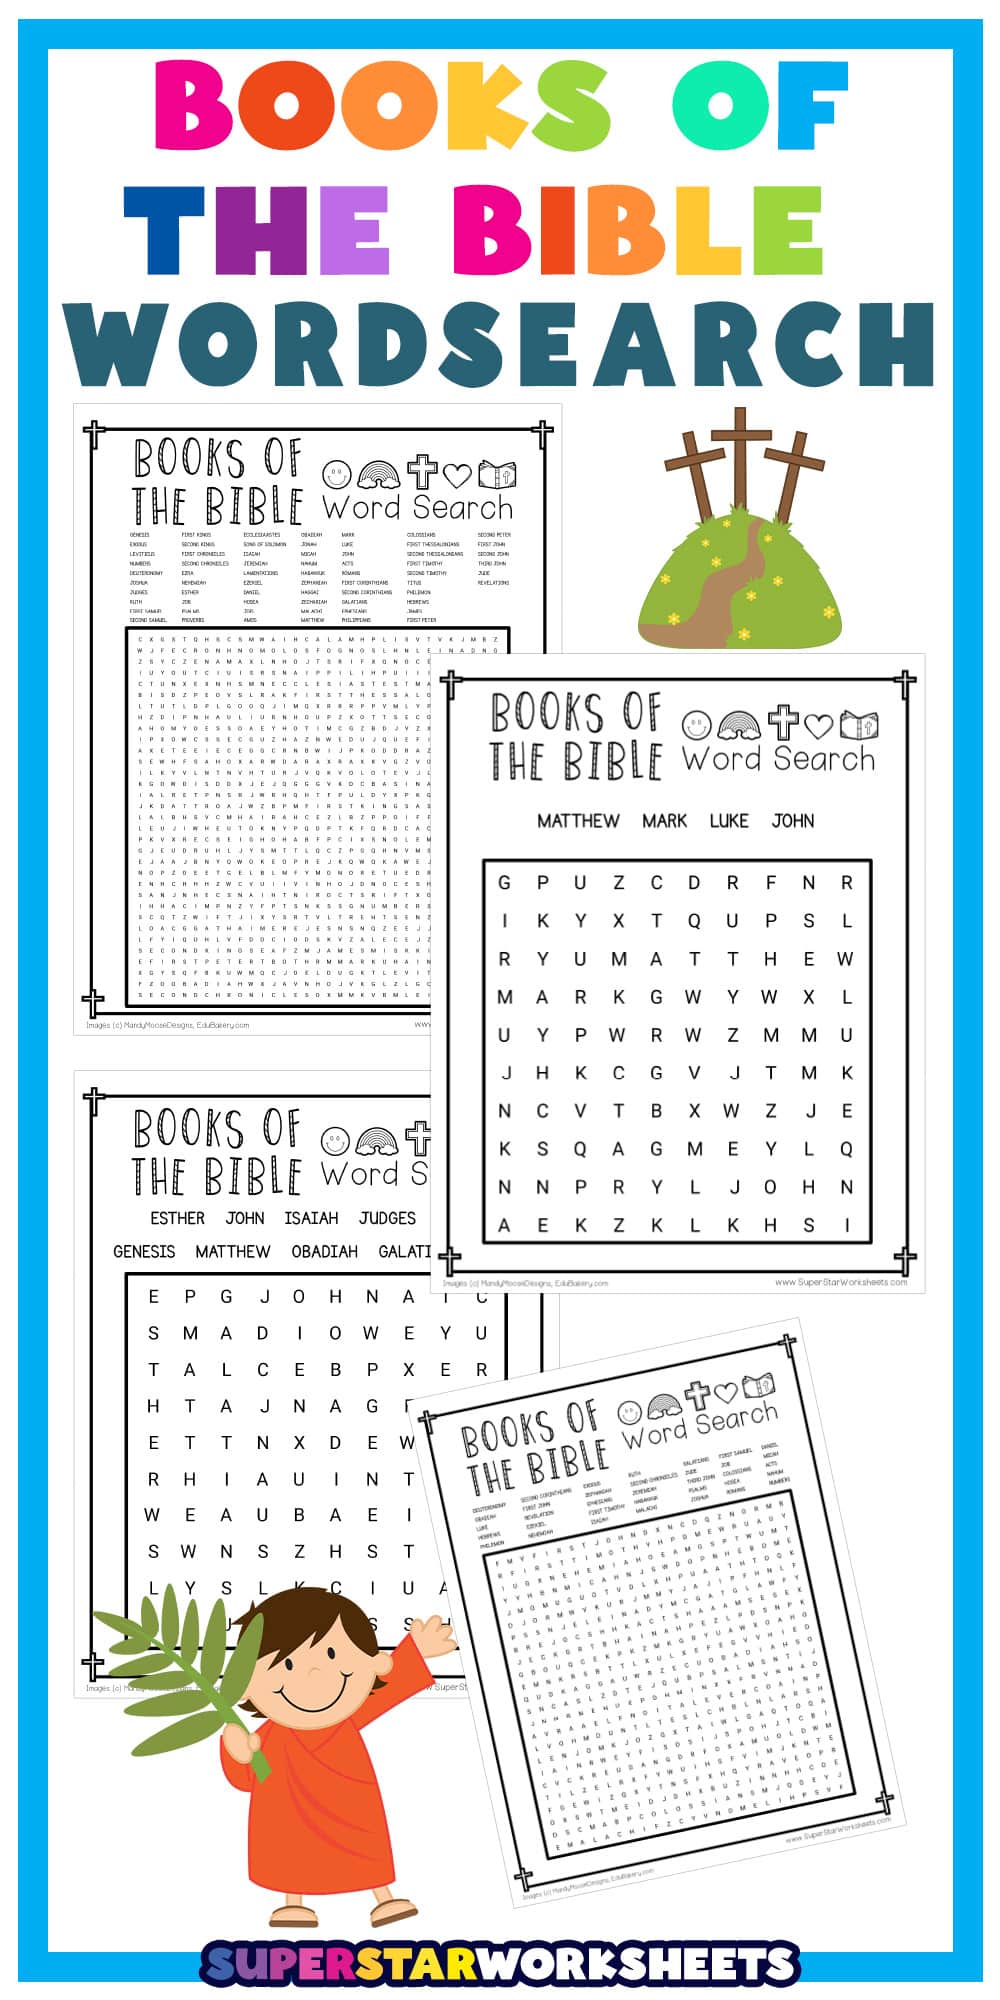 Books of the Bible Word Search - Superstar Worksheets